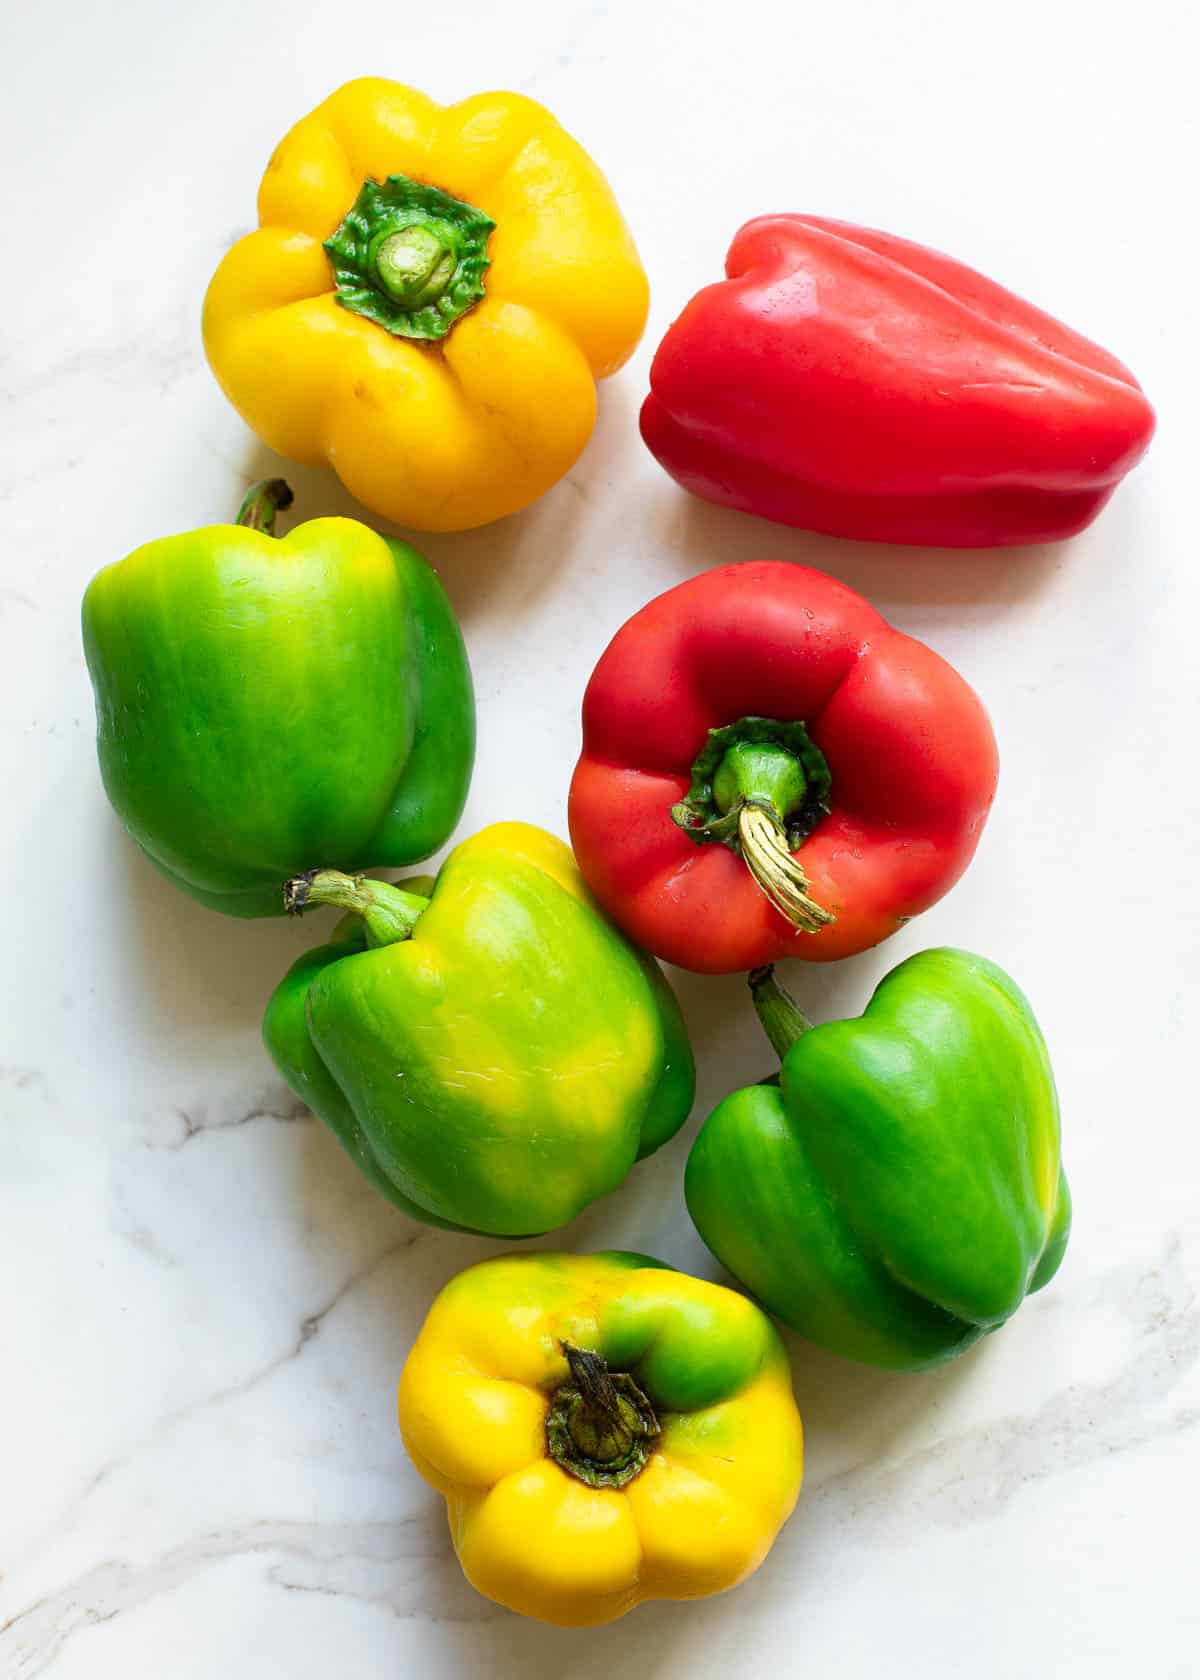 Assorted colors of bell peppers on a marble surface.